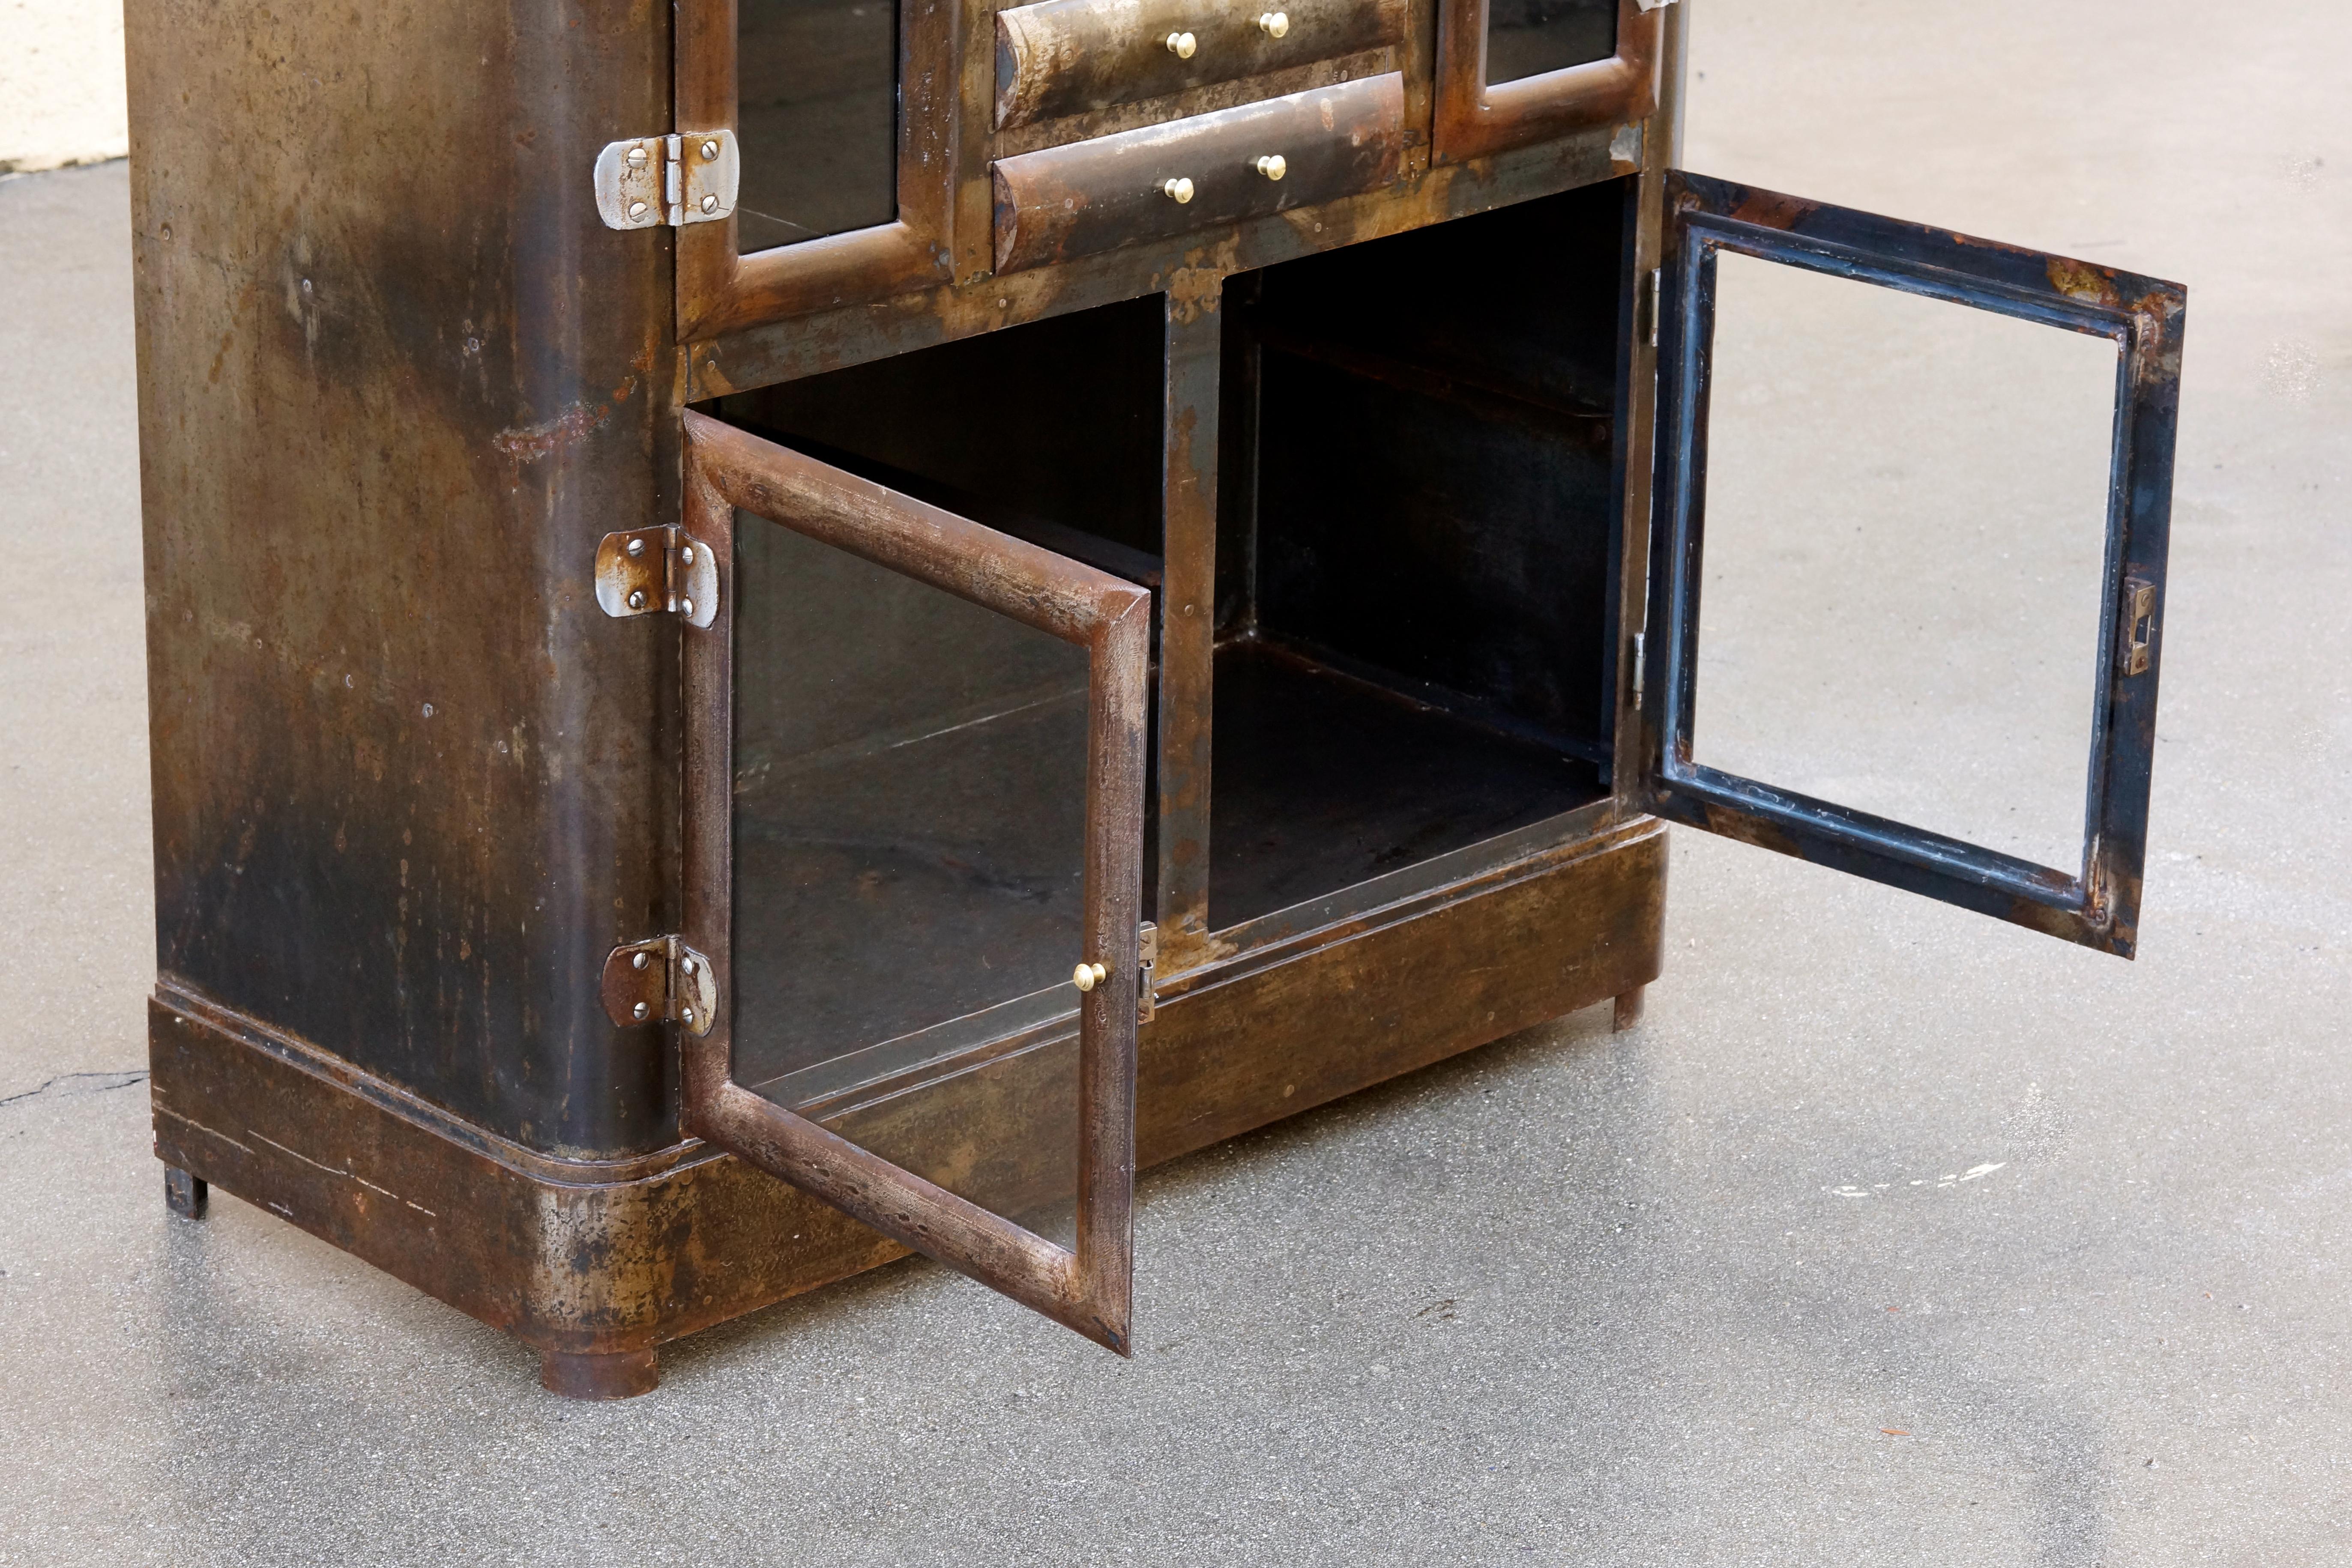 1920s Apothecary Cabinet with Distressed Patina (amerikanisch)